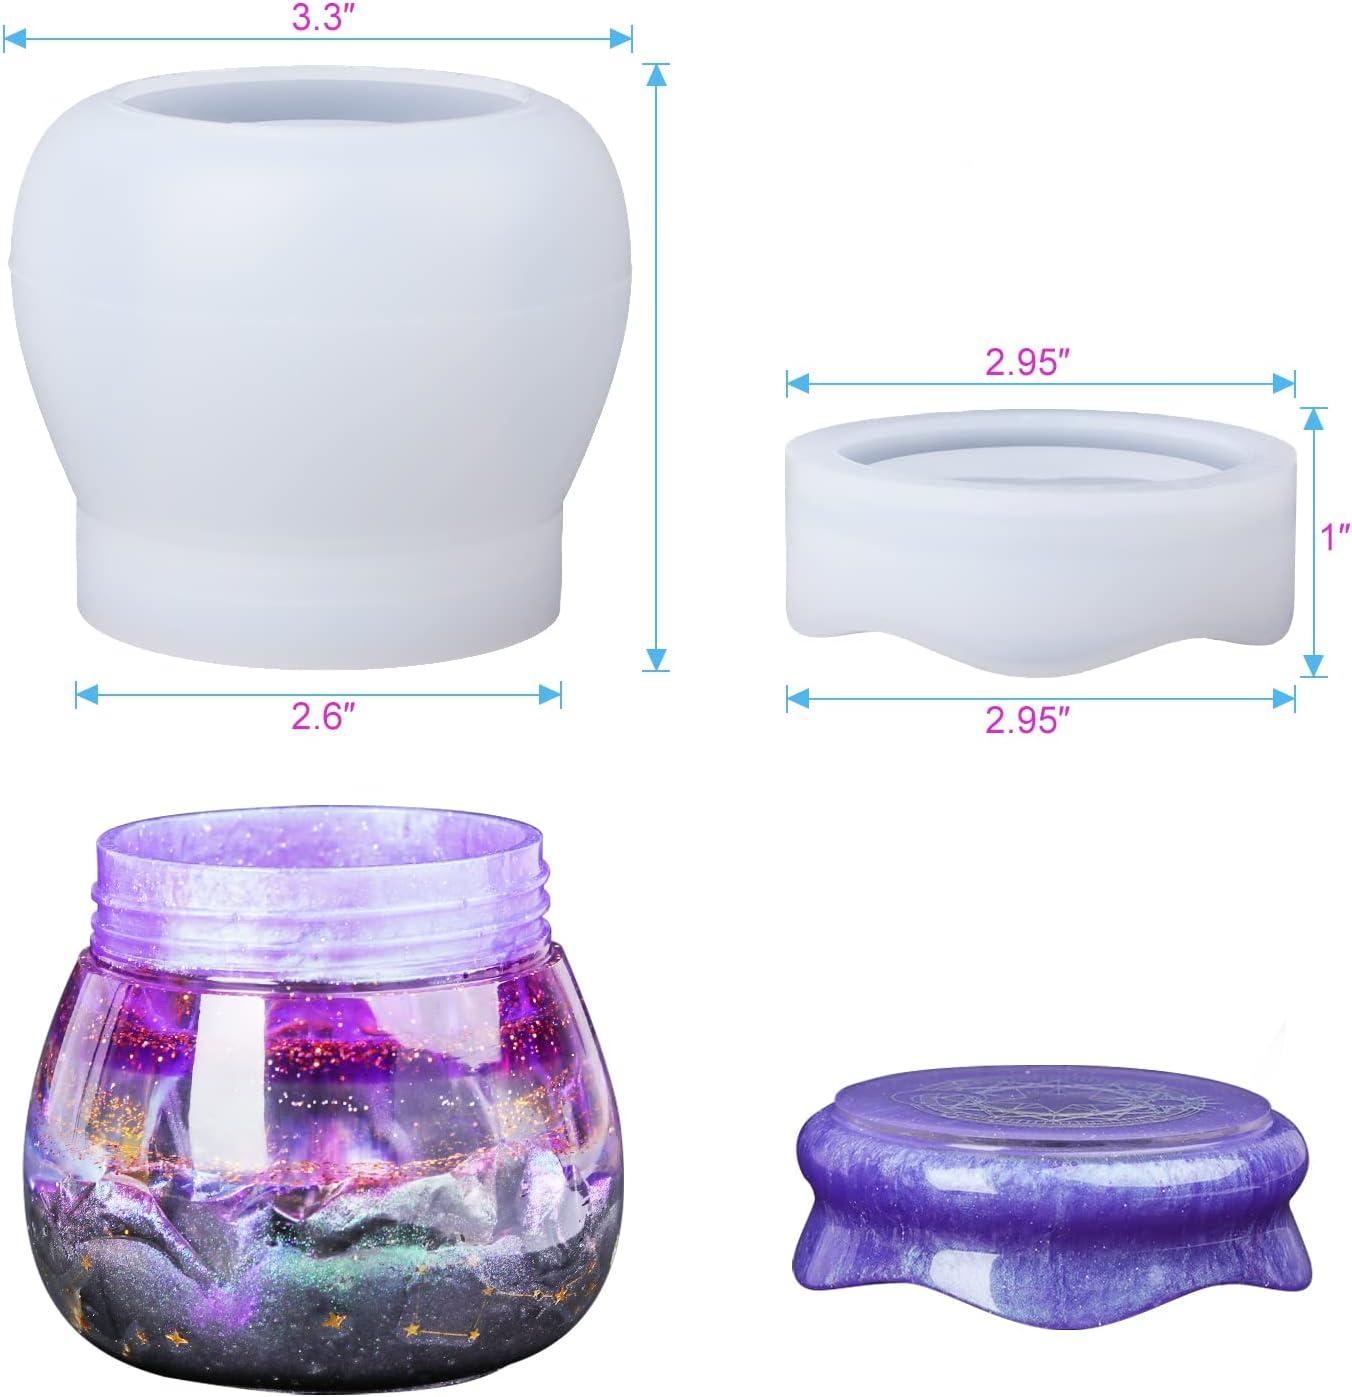 Let's Resin Jar Resin Molds Silicone, Pudding Jar Resin Molds with Lid, Epoxy Molds Silicone for Storage Bottle,Candle Holder,Candy Container, Epoxy